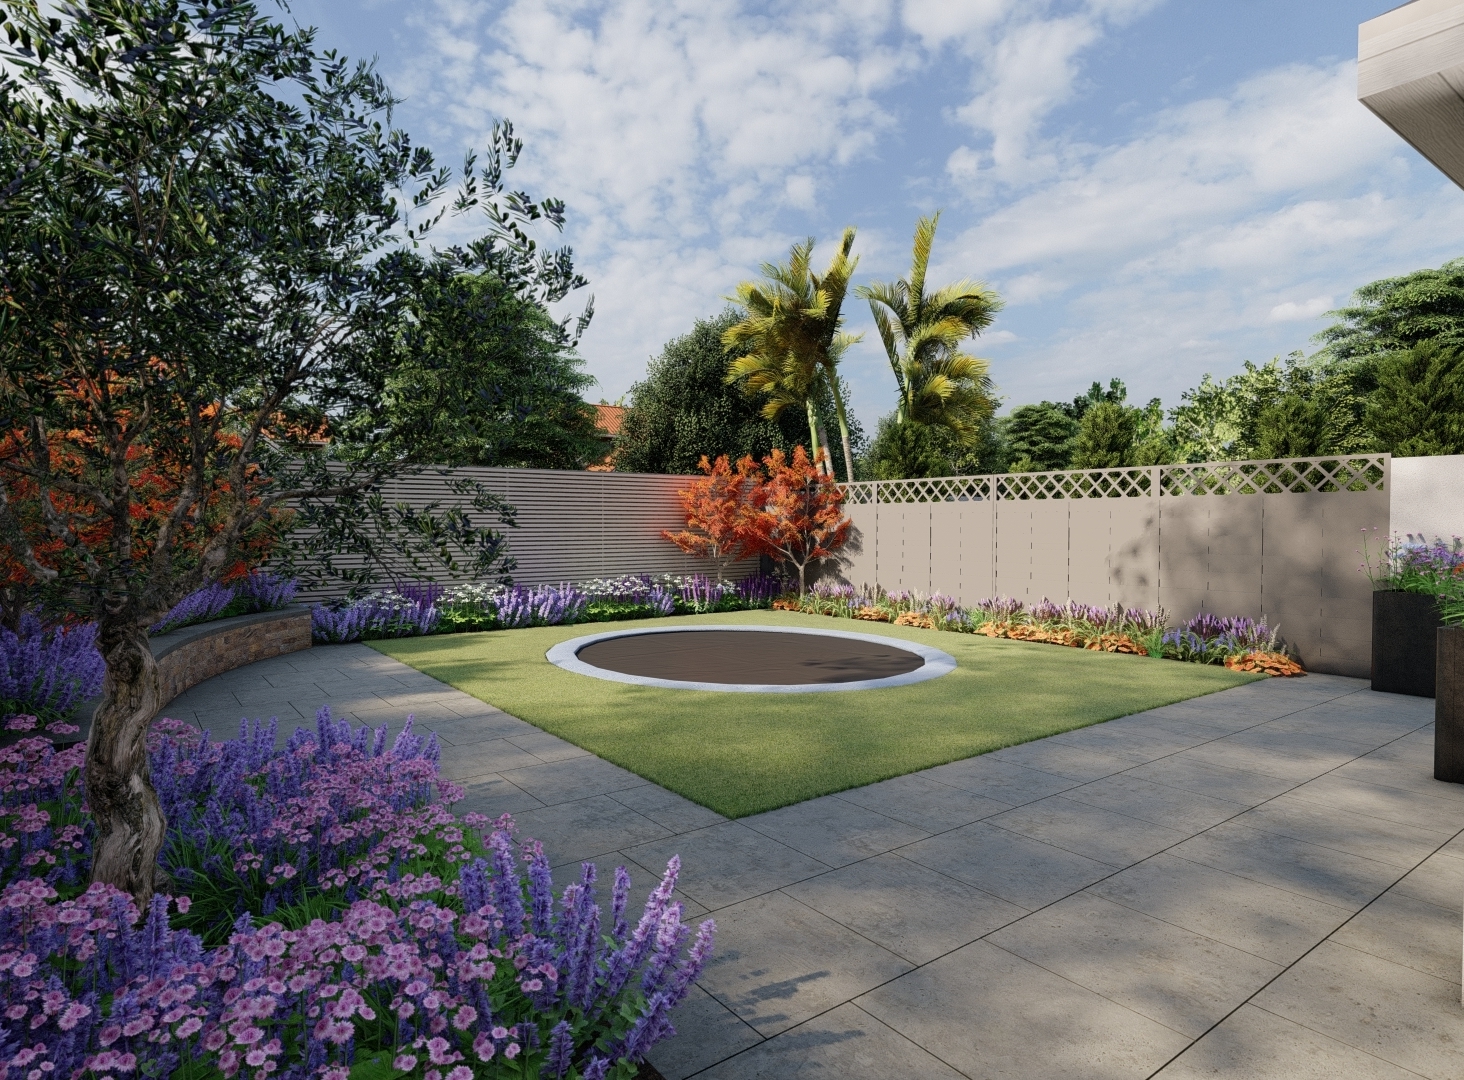 Design Rendering of proposed layout for a small Family garden in Terenure, Dublin 6W. Owen Chubb Garden Landscapers. Tel 087-2306128